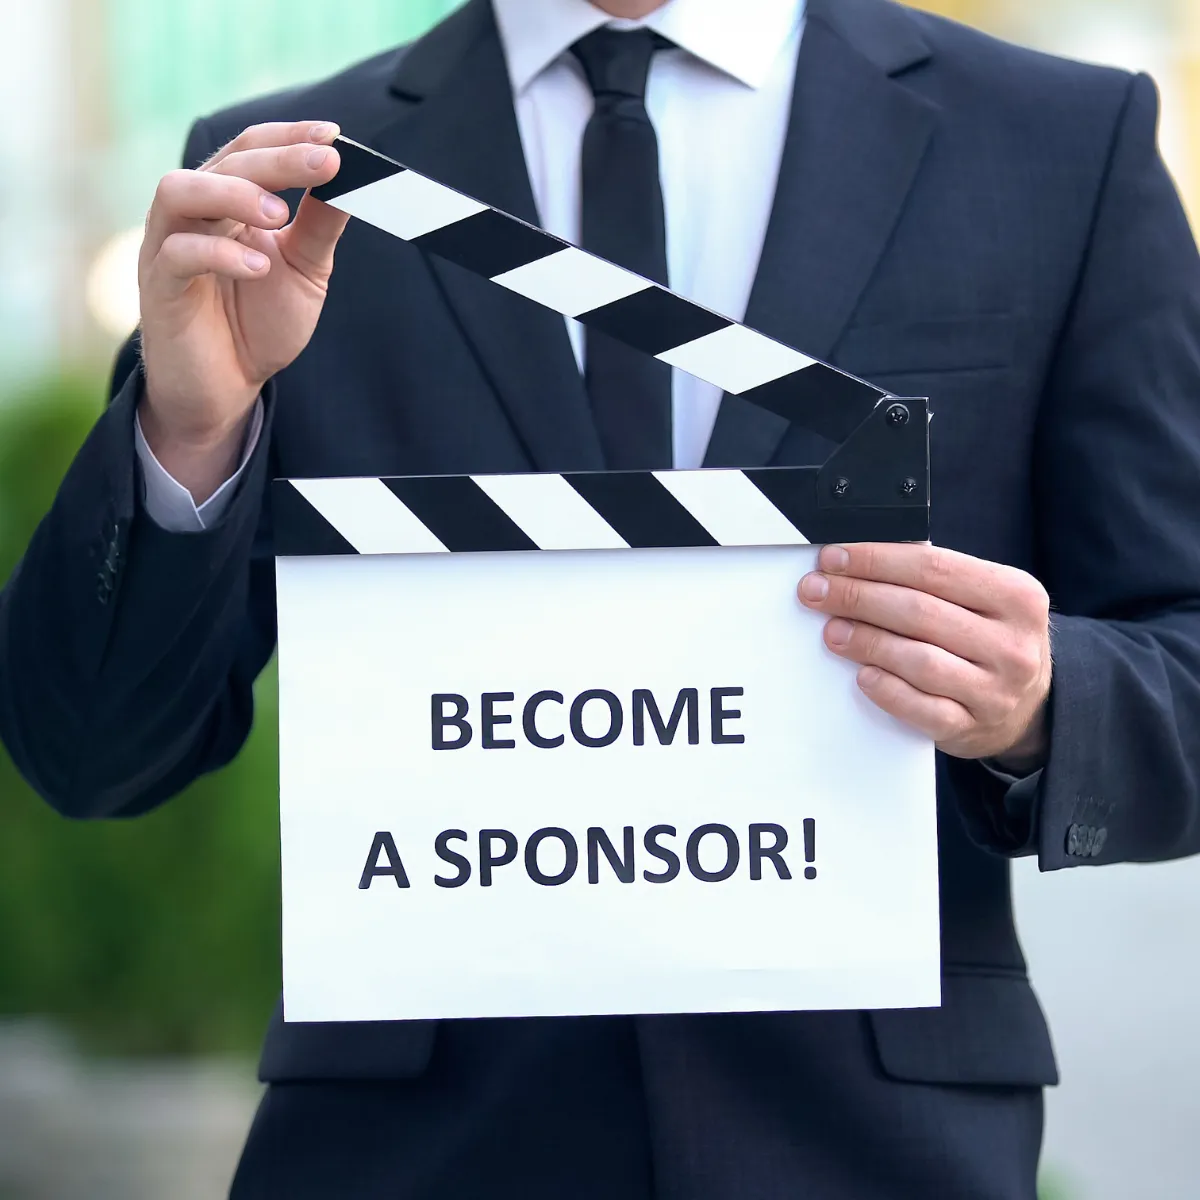 Become a Sponsor Images for DEI Sponsorship with Priscilla Kucer Consulting Solutions PKCS LLC